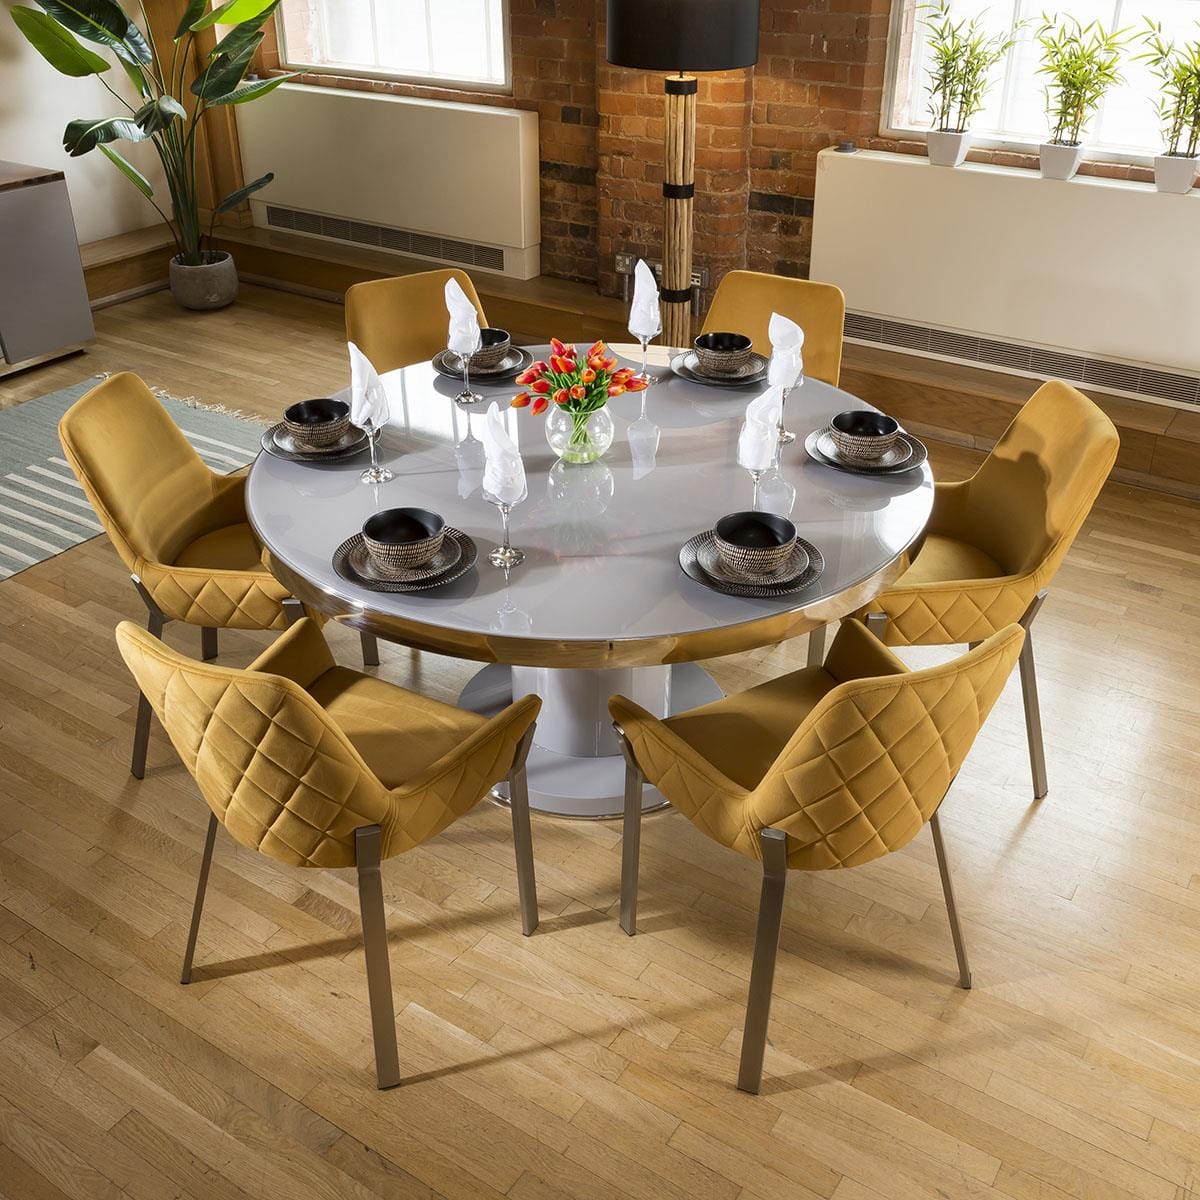 What Is The Ideal Round Dining Table Size For 6 Guests?